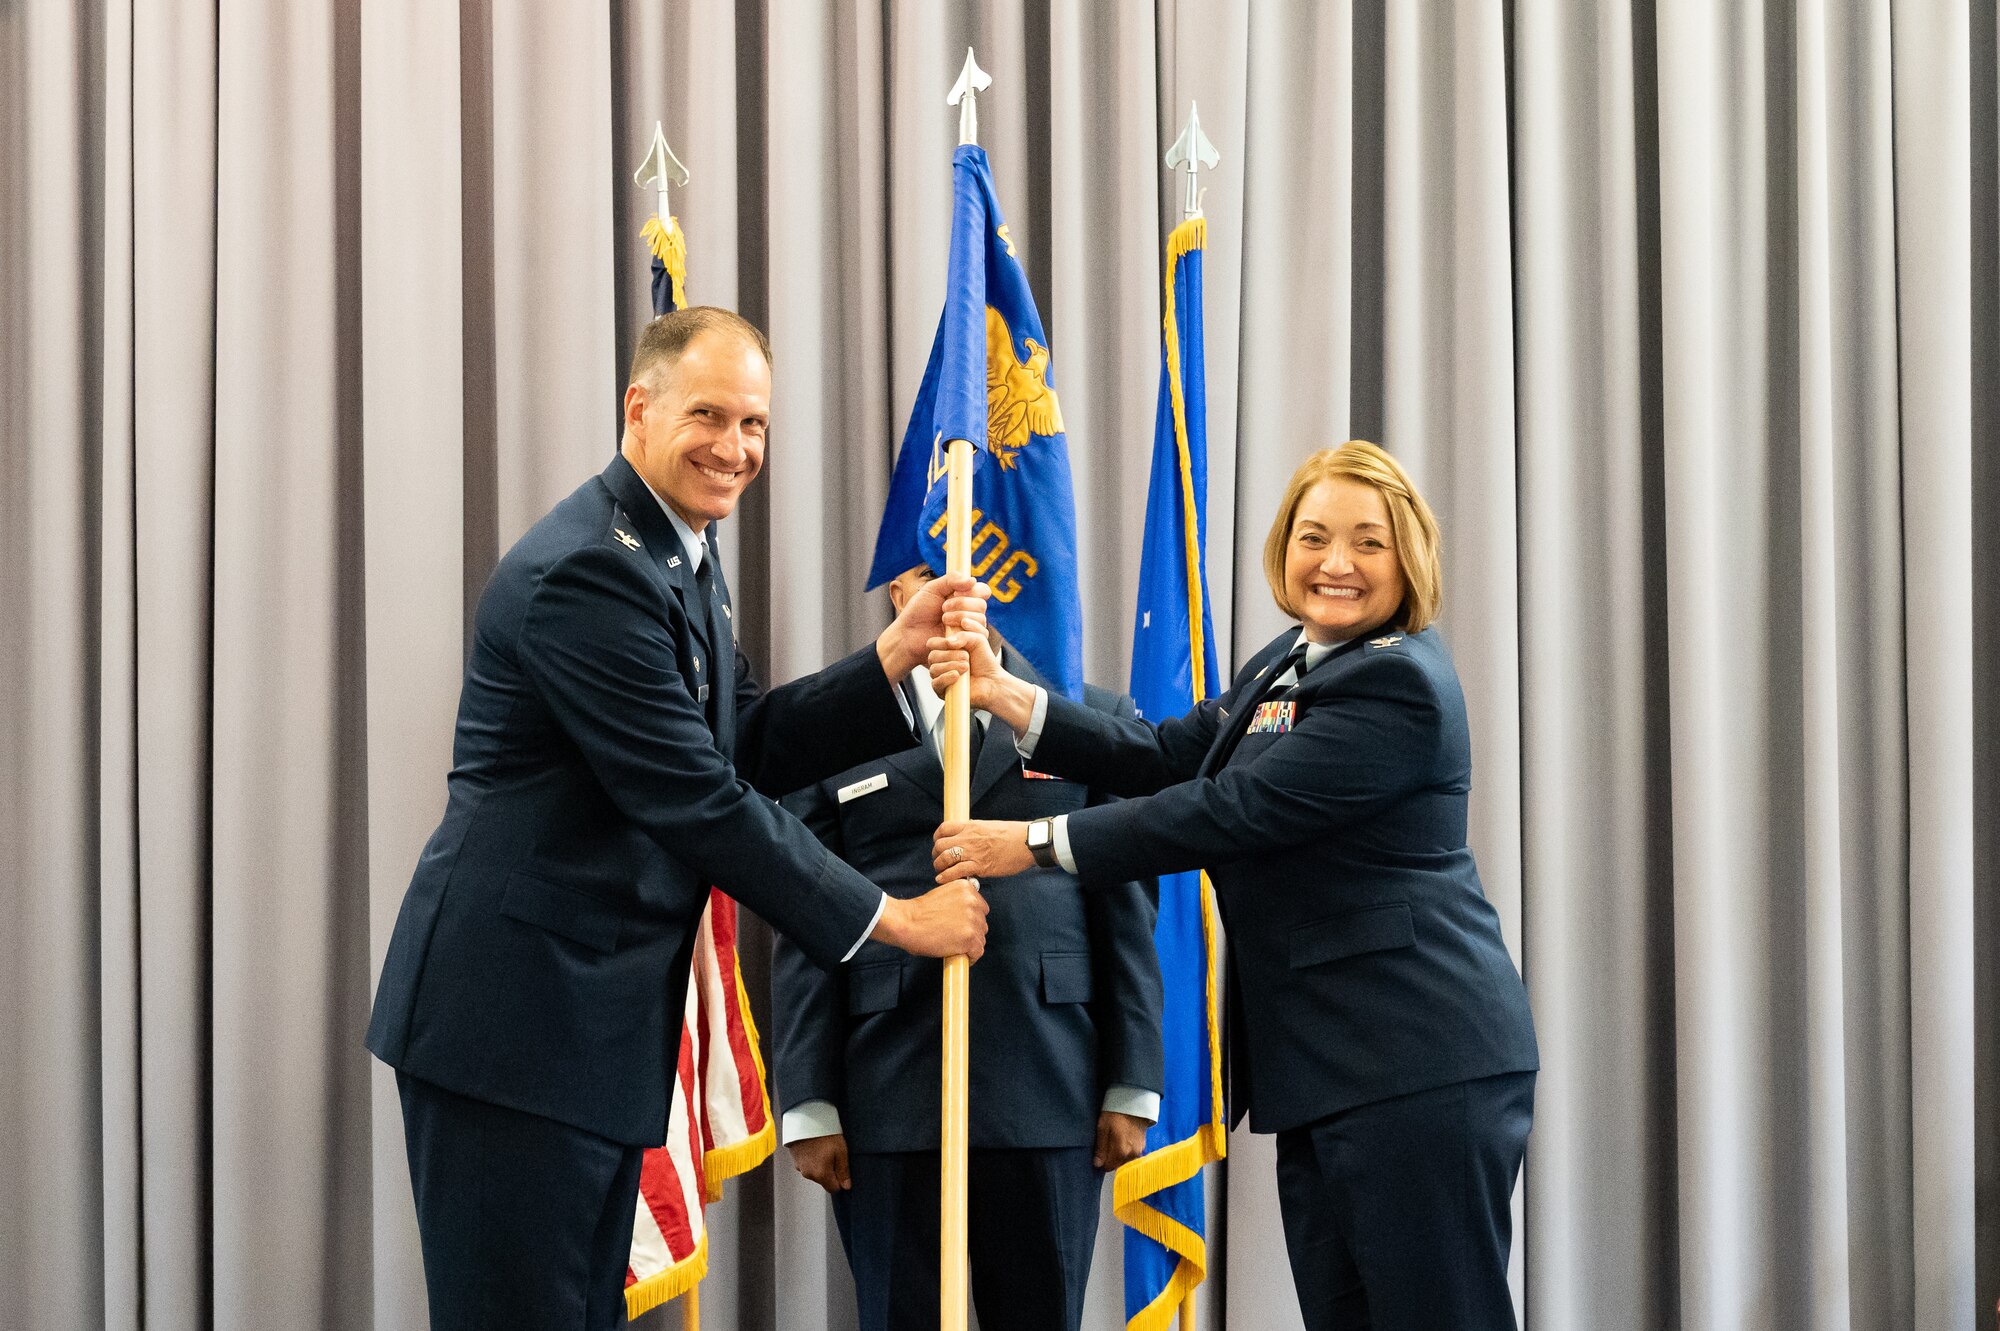 Col. Matt Husemann, left, 436th Airlift Wing commander, passes the guidon to Col. Peggy Dickson, 436th Medical Group commander, during the 436th MDG Change of Command ceremony at Dover Air Force Base, Delaware, June 9, 2022. Dickson was previously the commander of the 10th Dental Squadron at the U.S. Air Force Academy in Colorado. (U.S. Air Force photo by Mauricio Campino)